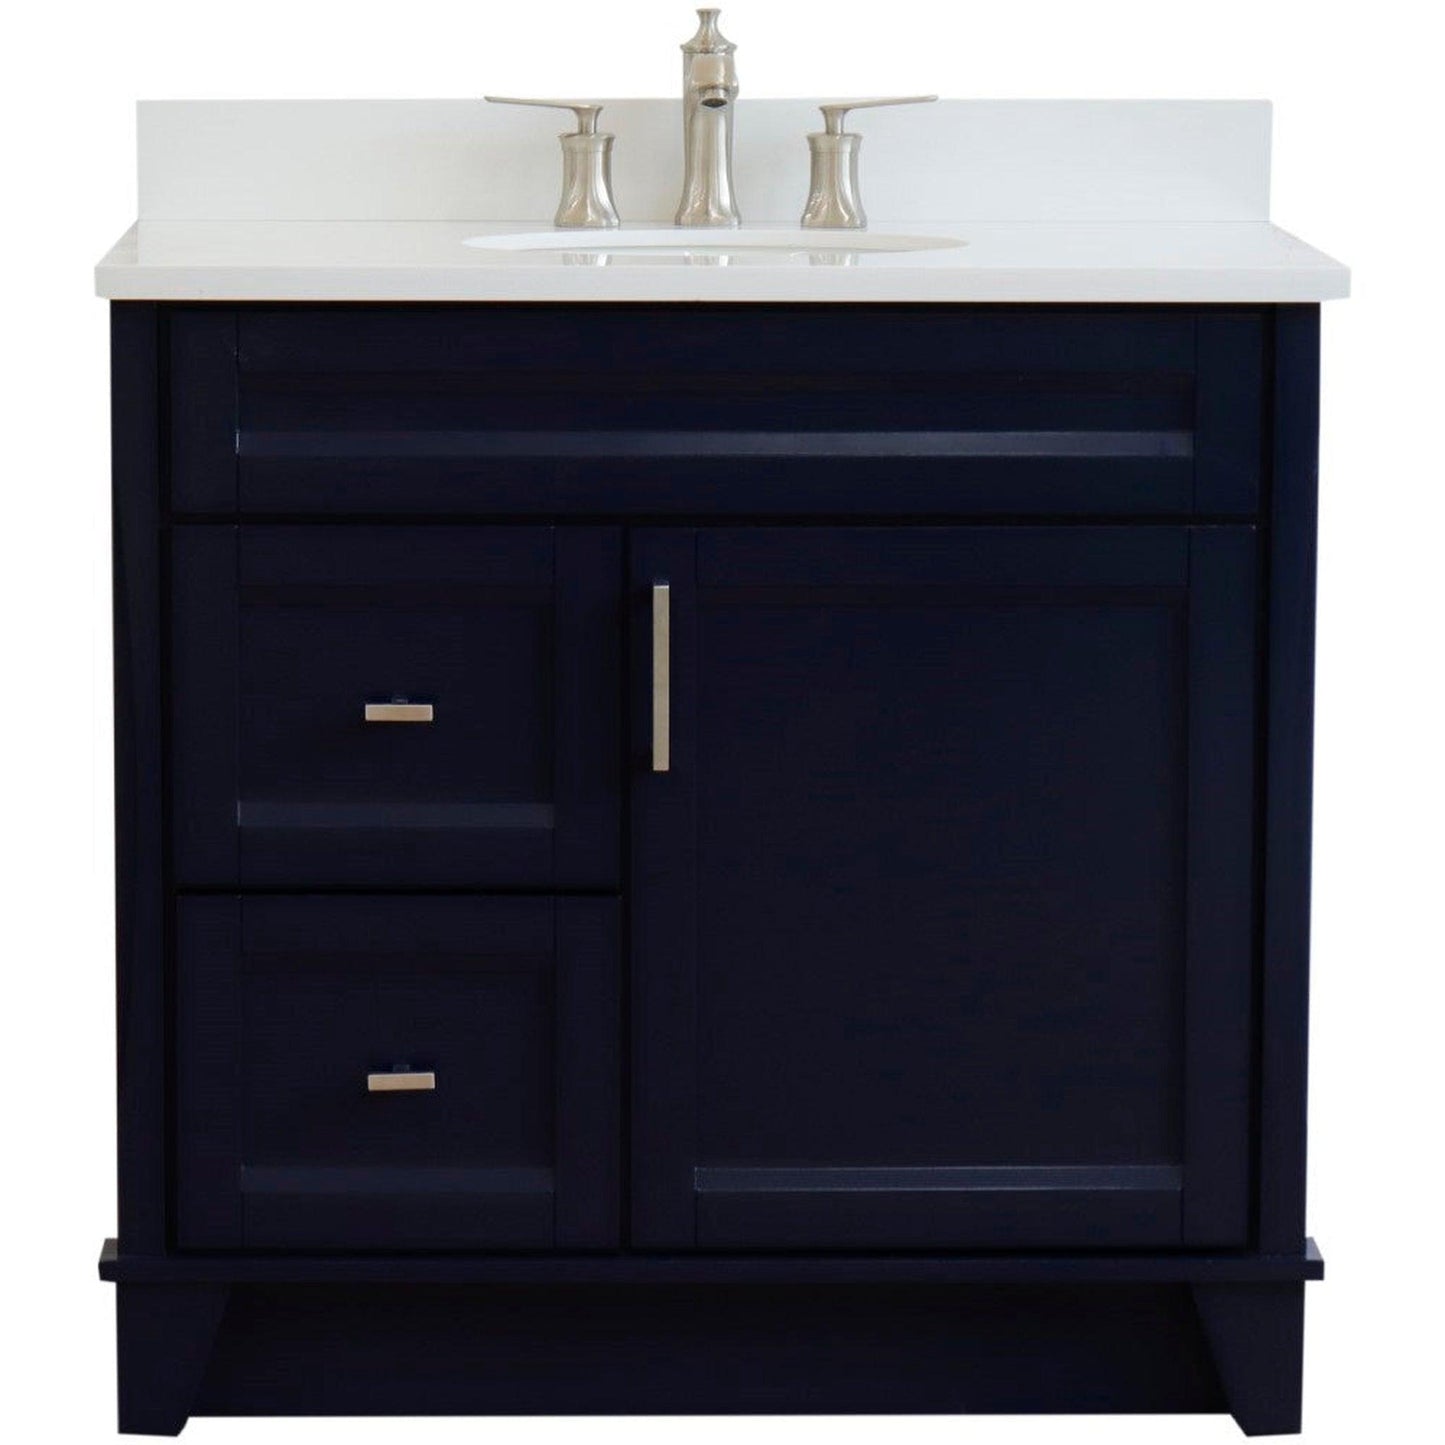 Bellaterra Home Terni 37" 1-Door 2-Drawer Blue Freestanding Vanity Set With Ceramic Center Undermount Oval Sink and White Quartz Top, and Right Door Base